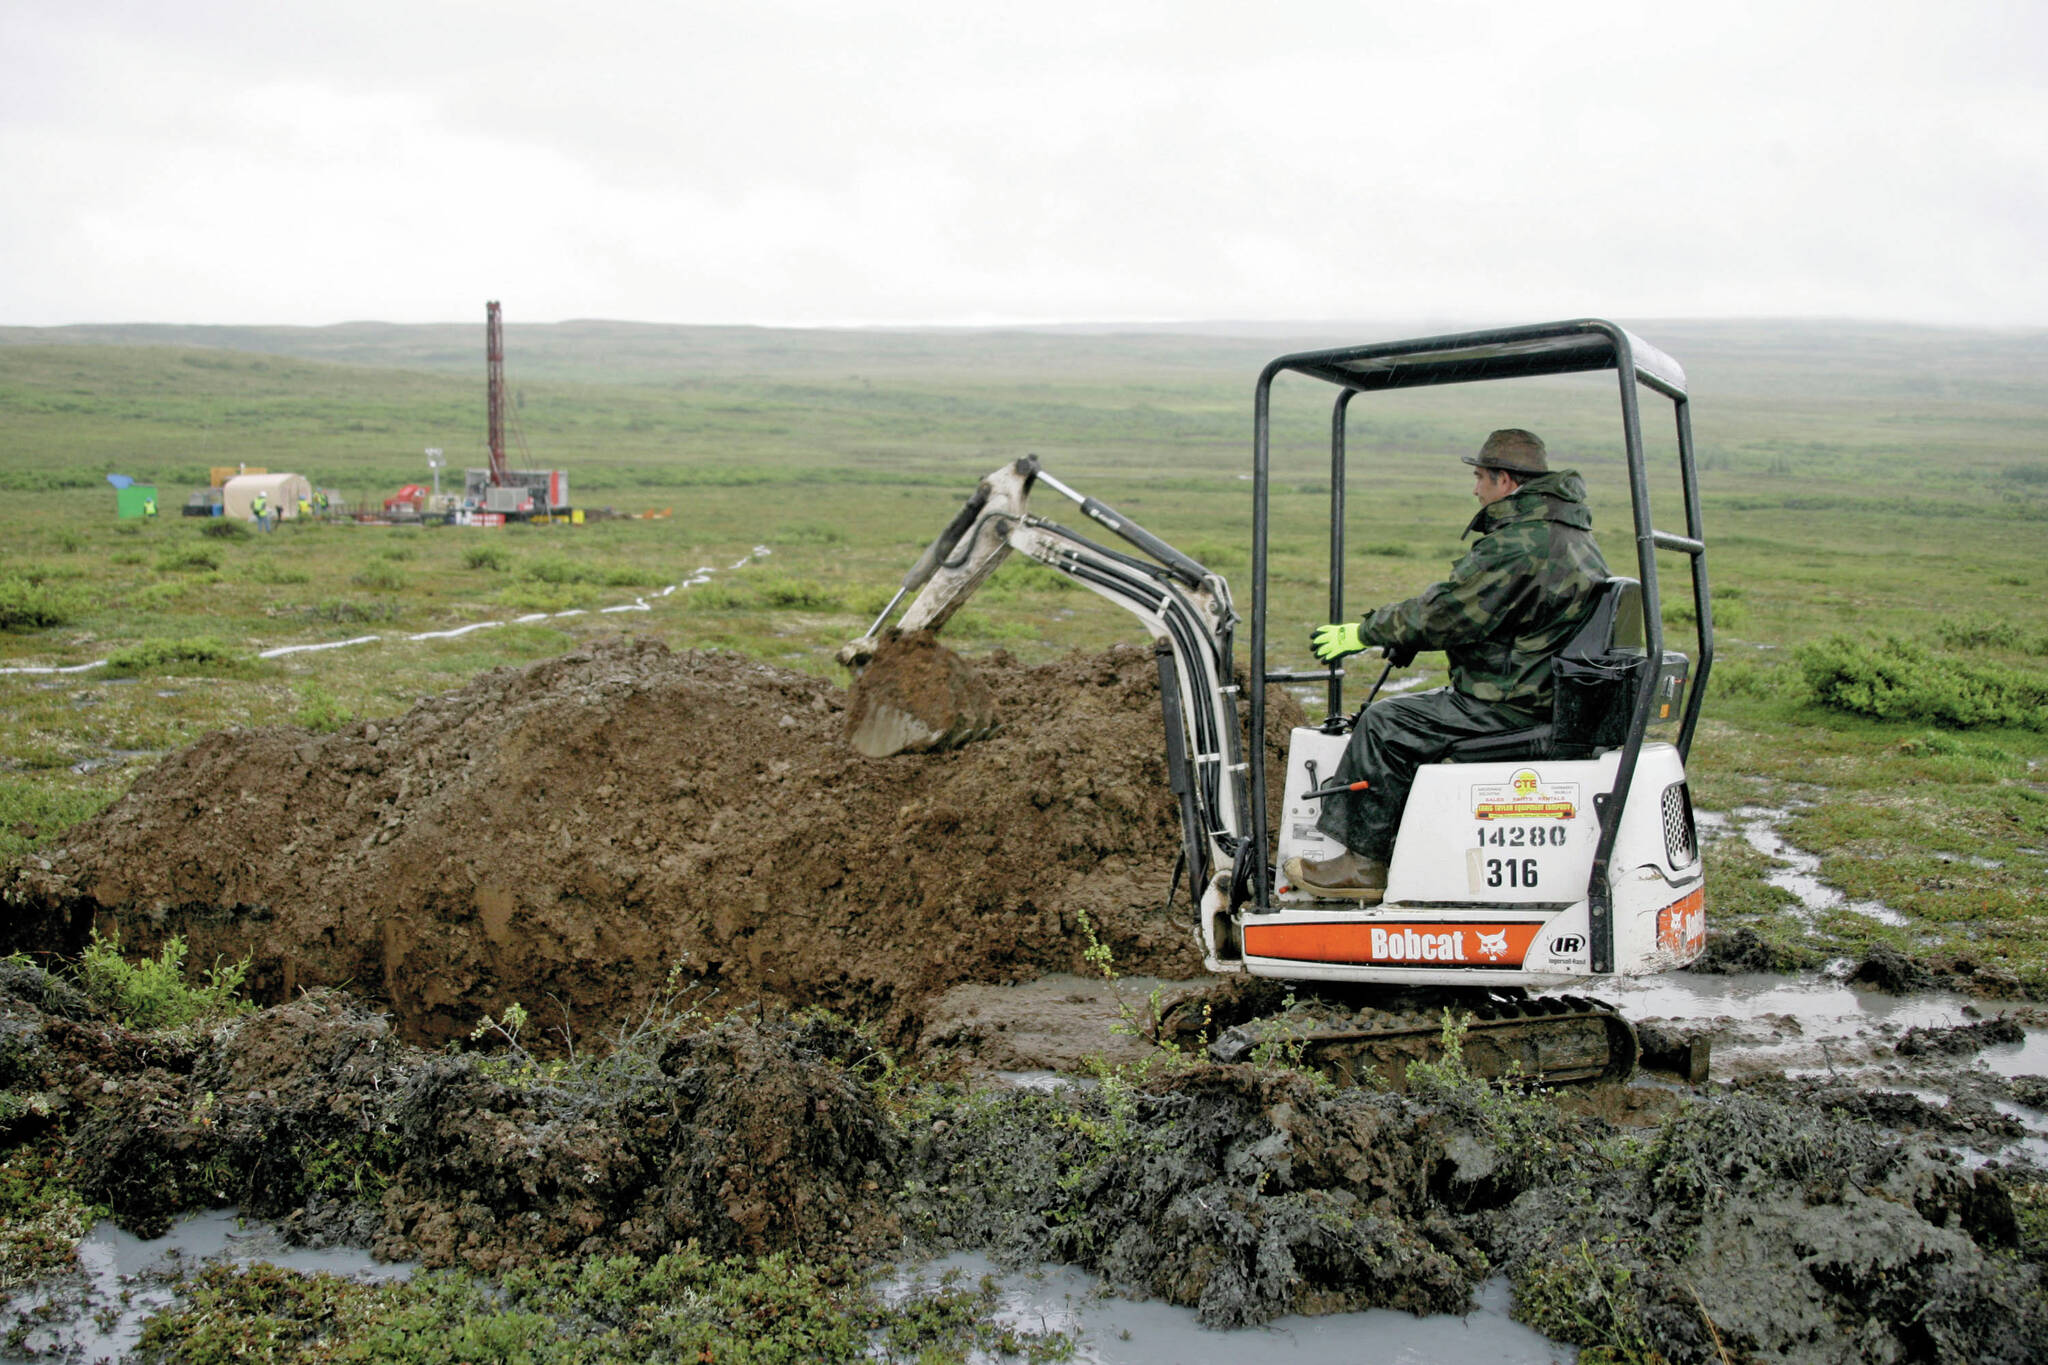 AP Photo / Al Grillo 
A worker with the Pebble Mine project digs in the Bristol Bay region of Alaska near the village of Iliamma, Alaska. The U.S. Environmental Protection Agency announced Thursday, Sept. 9, it would seek to restart a process that could restrict mining in Alaska’s Bristol Bay region, which is renowned for its salmon runs. The announcement is the latest in a long-running dispute over a proposed copper-and-gold mine in the southwest Alaska region.